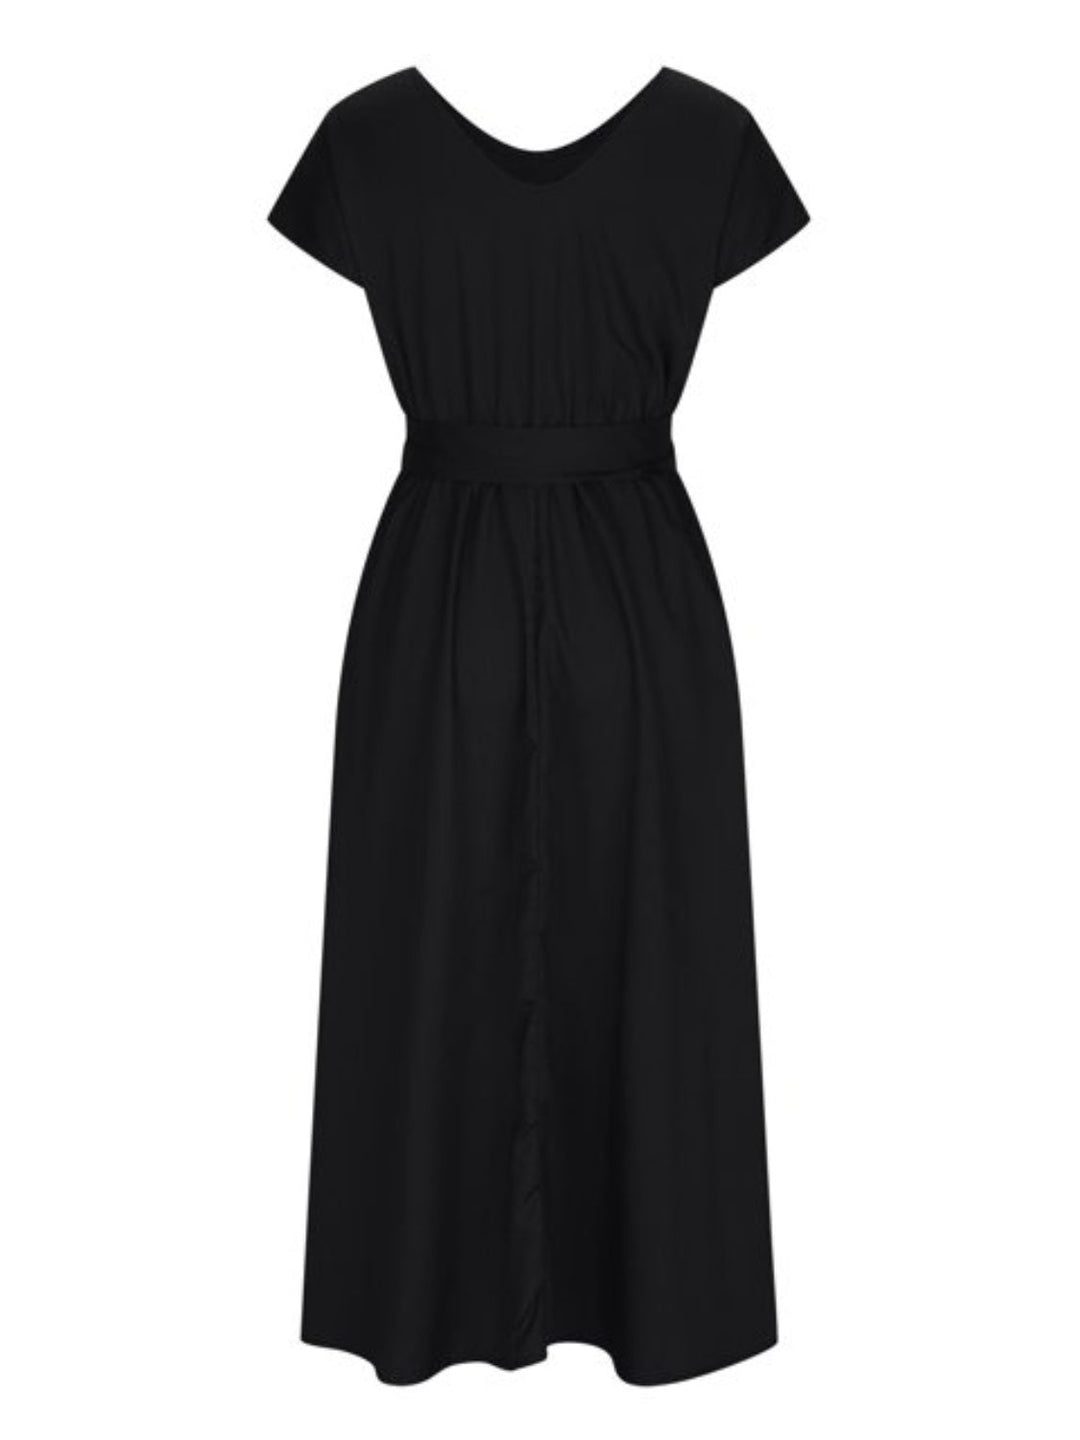 Ruched V-Neck Cap Sleeve Dress by Coco Charli